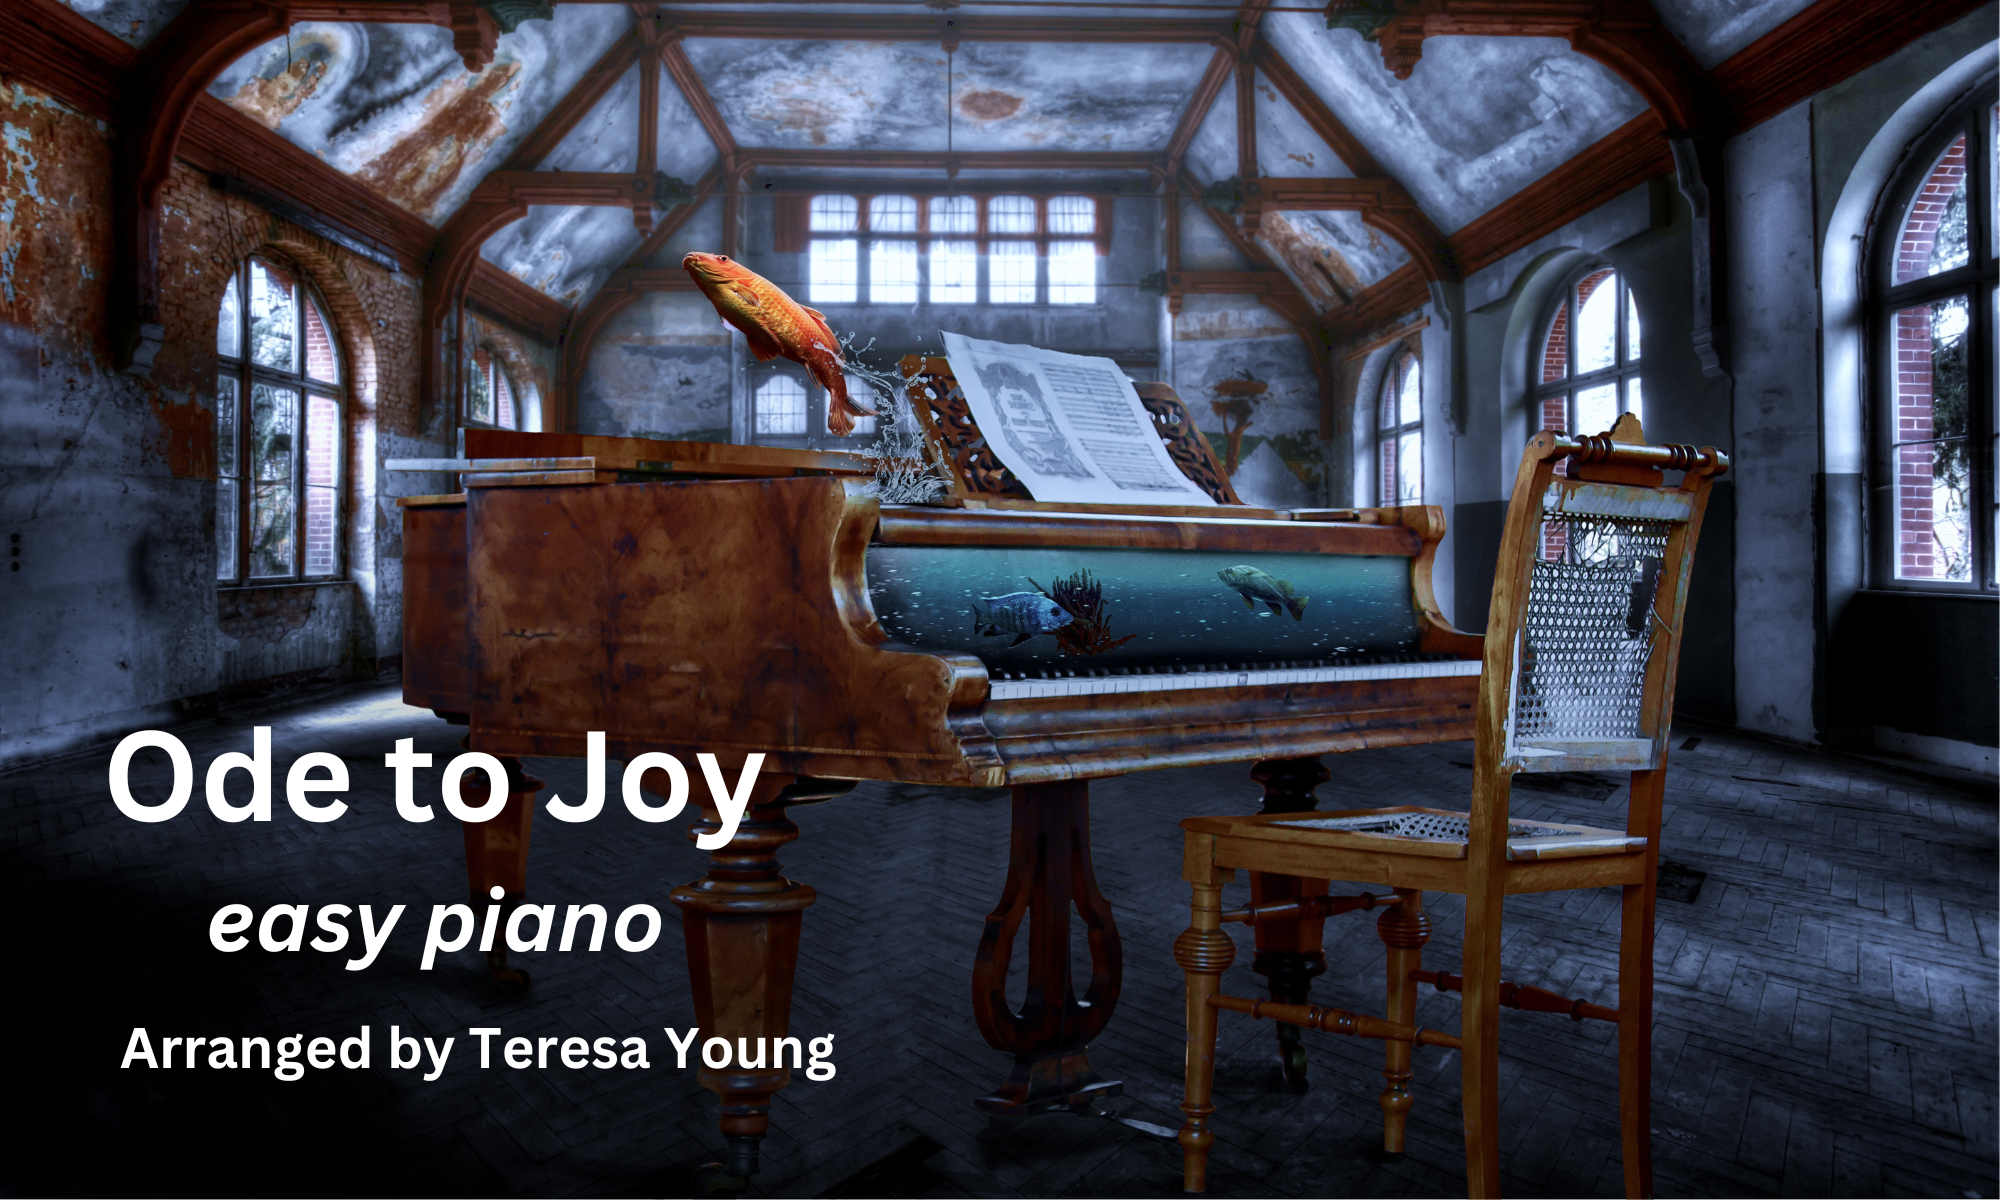 Ode to Joy, easy piano, arr. Teresa Young